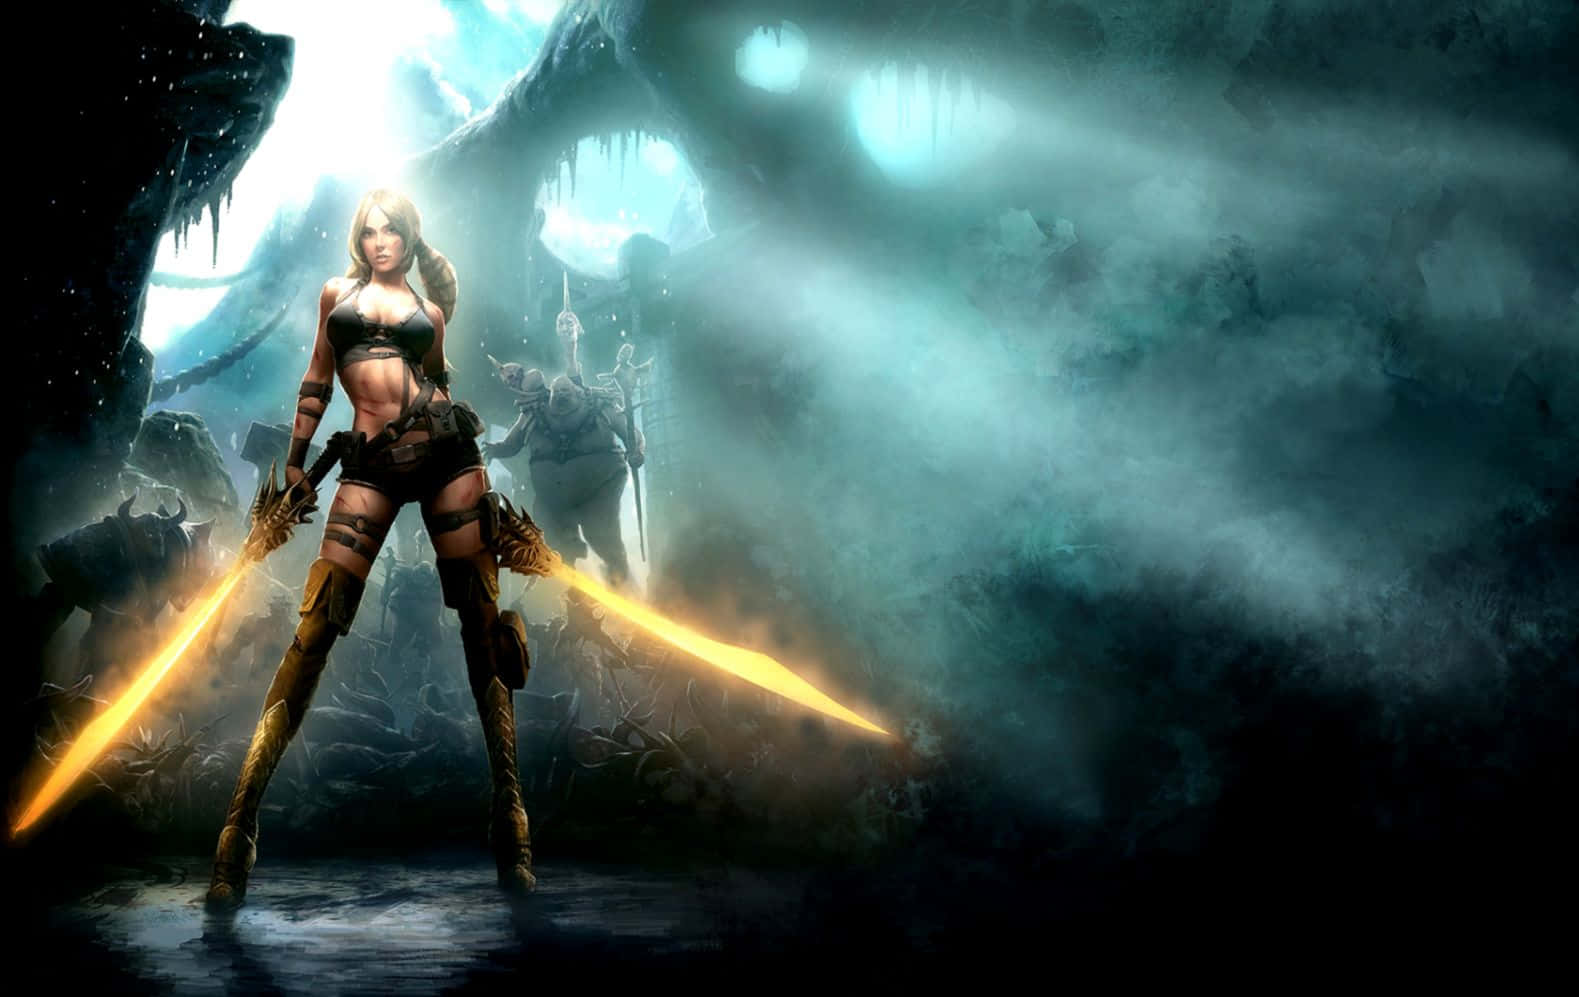 A Woman With Two Swords Standing In A Dark Cave